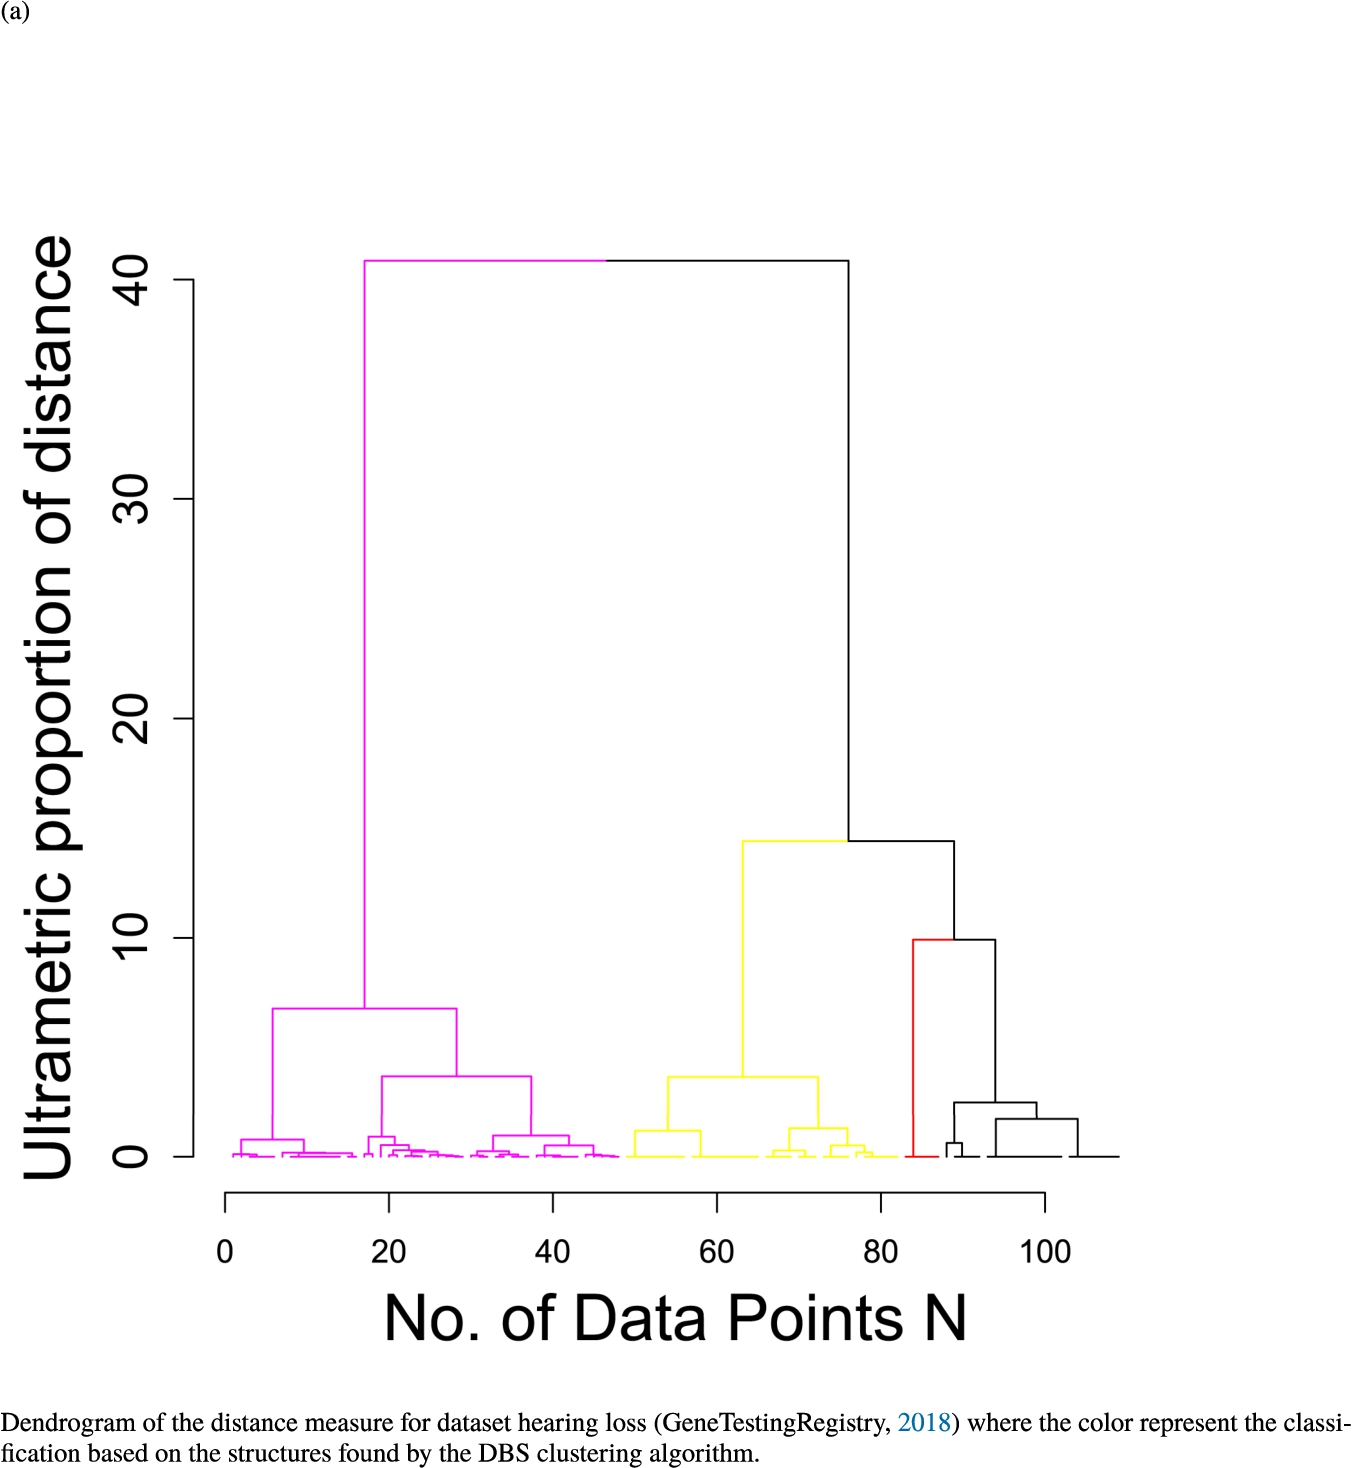 Dendrogram of the distance measure for the four use case datasets. The dendrogram visualizes the ultrametric property of the distance measure, which is able to represent proximity and hierarchical structures of high-dimensional data (Murtagh, 2004). In the dendrogram, close datapoints or clusters of datapoints are connected with each other creating a connection between two points on the x axis with small height on the y axis. The further away two datapoints or clusters of datapoints are, the higher is the height of the built connection represented on the y axis.